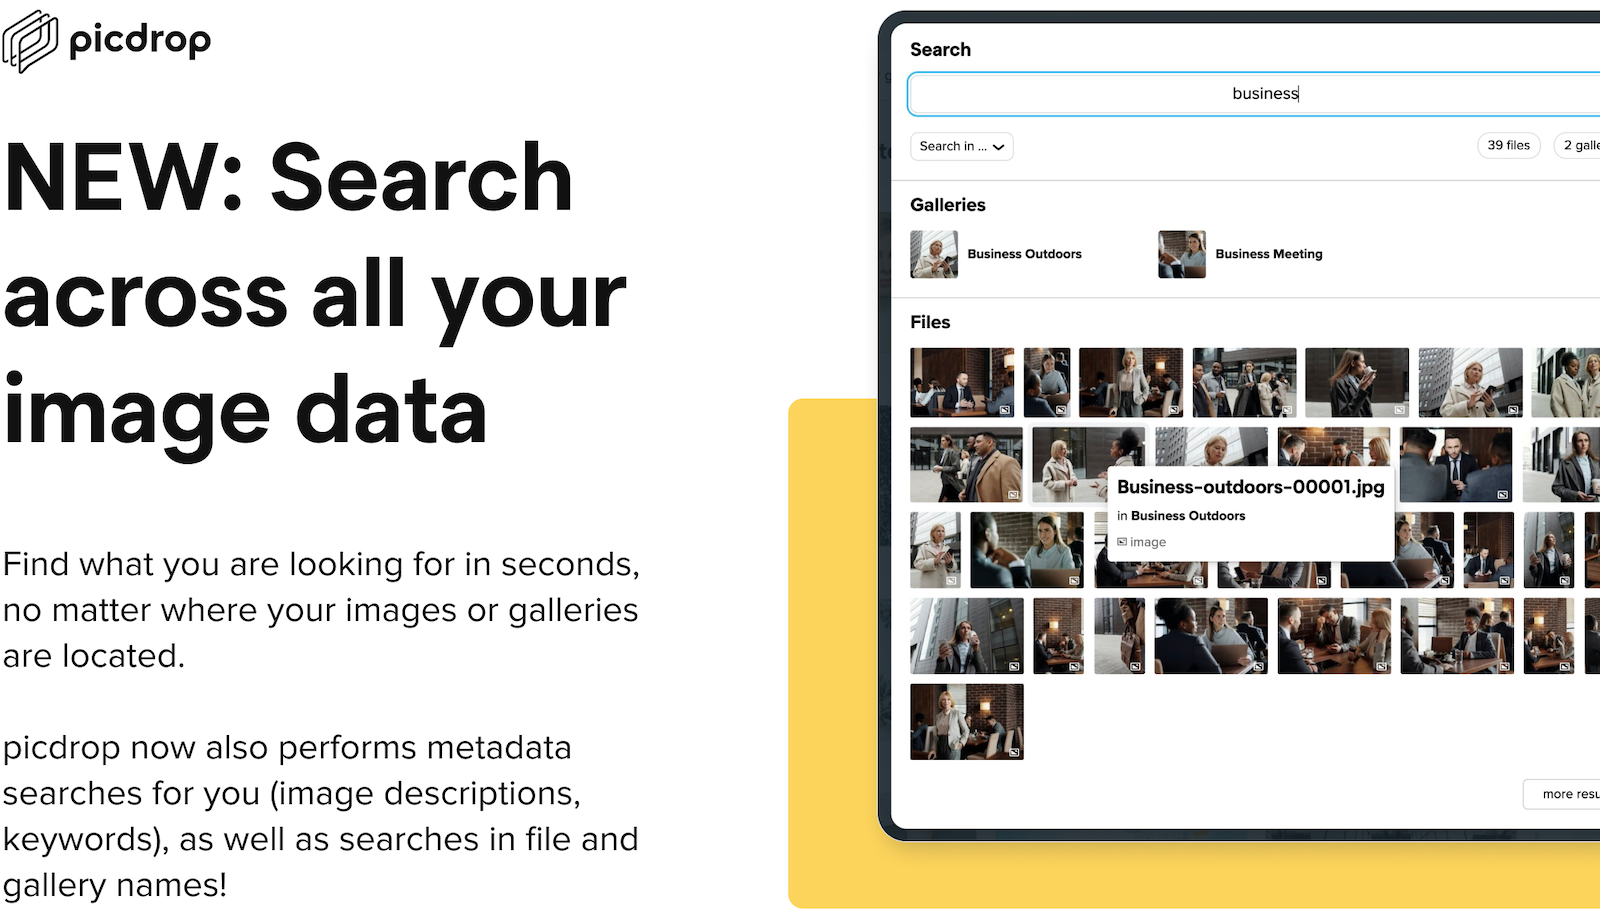 NEW: Search across all your image data